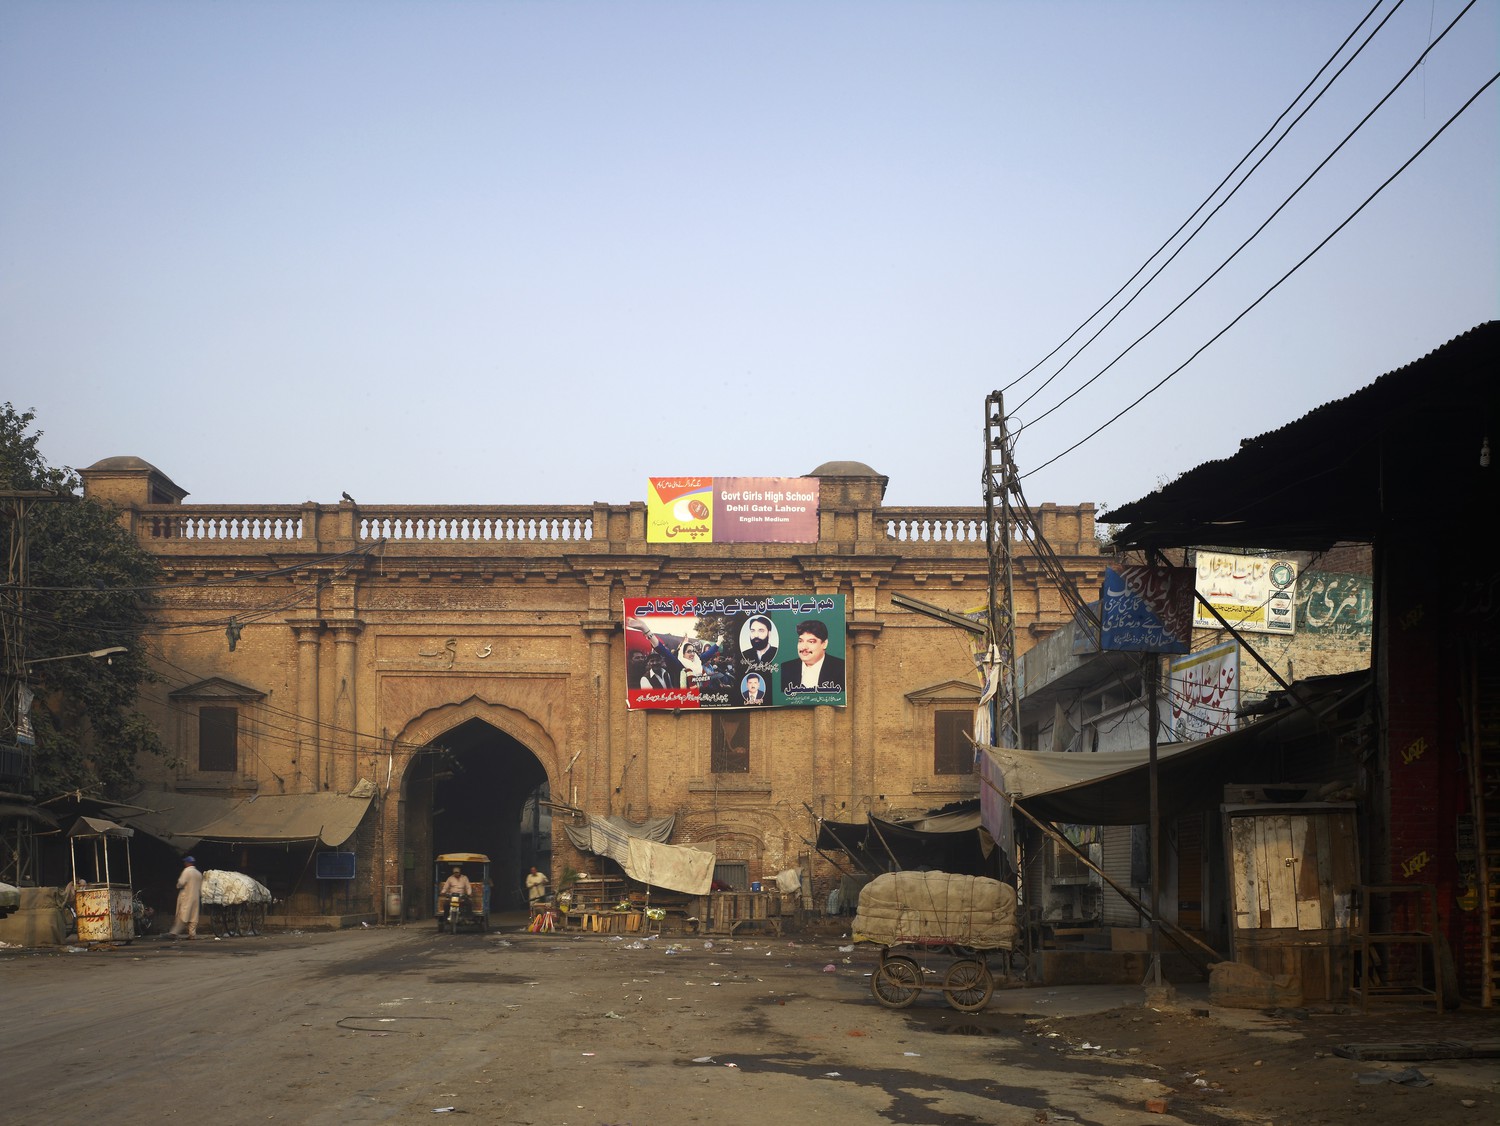 Lahore Walled City Urban Regeneration Project - Delhi Gate, one of the thirteen entrances to the Walled City